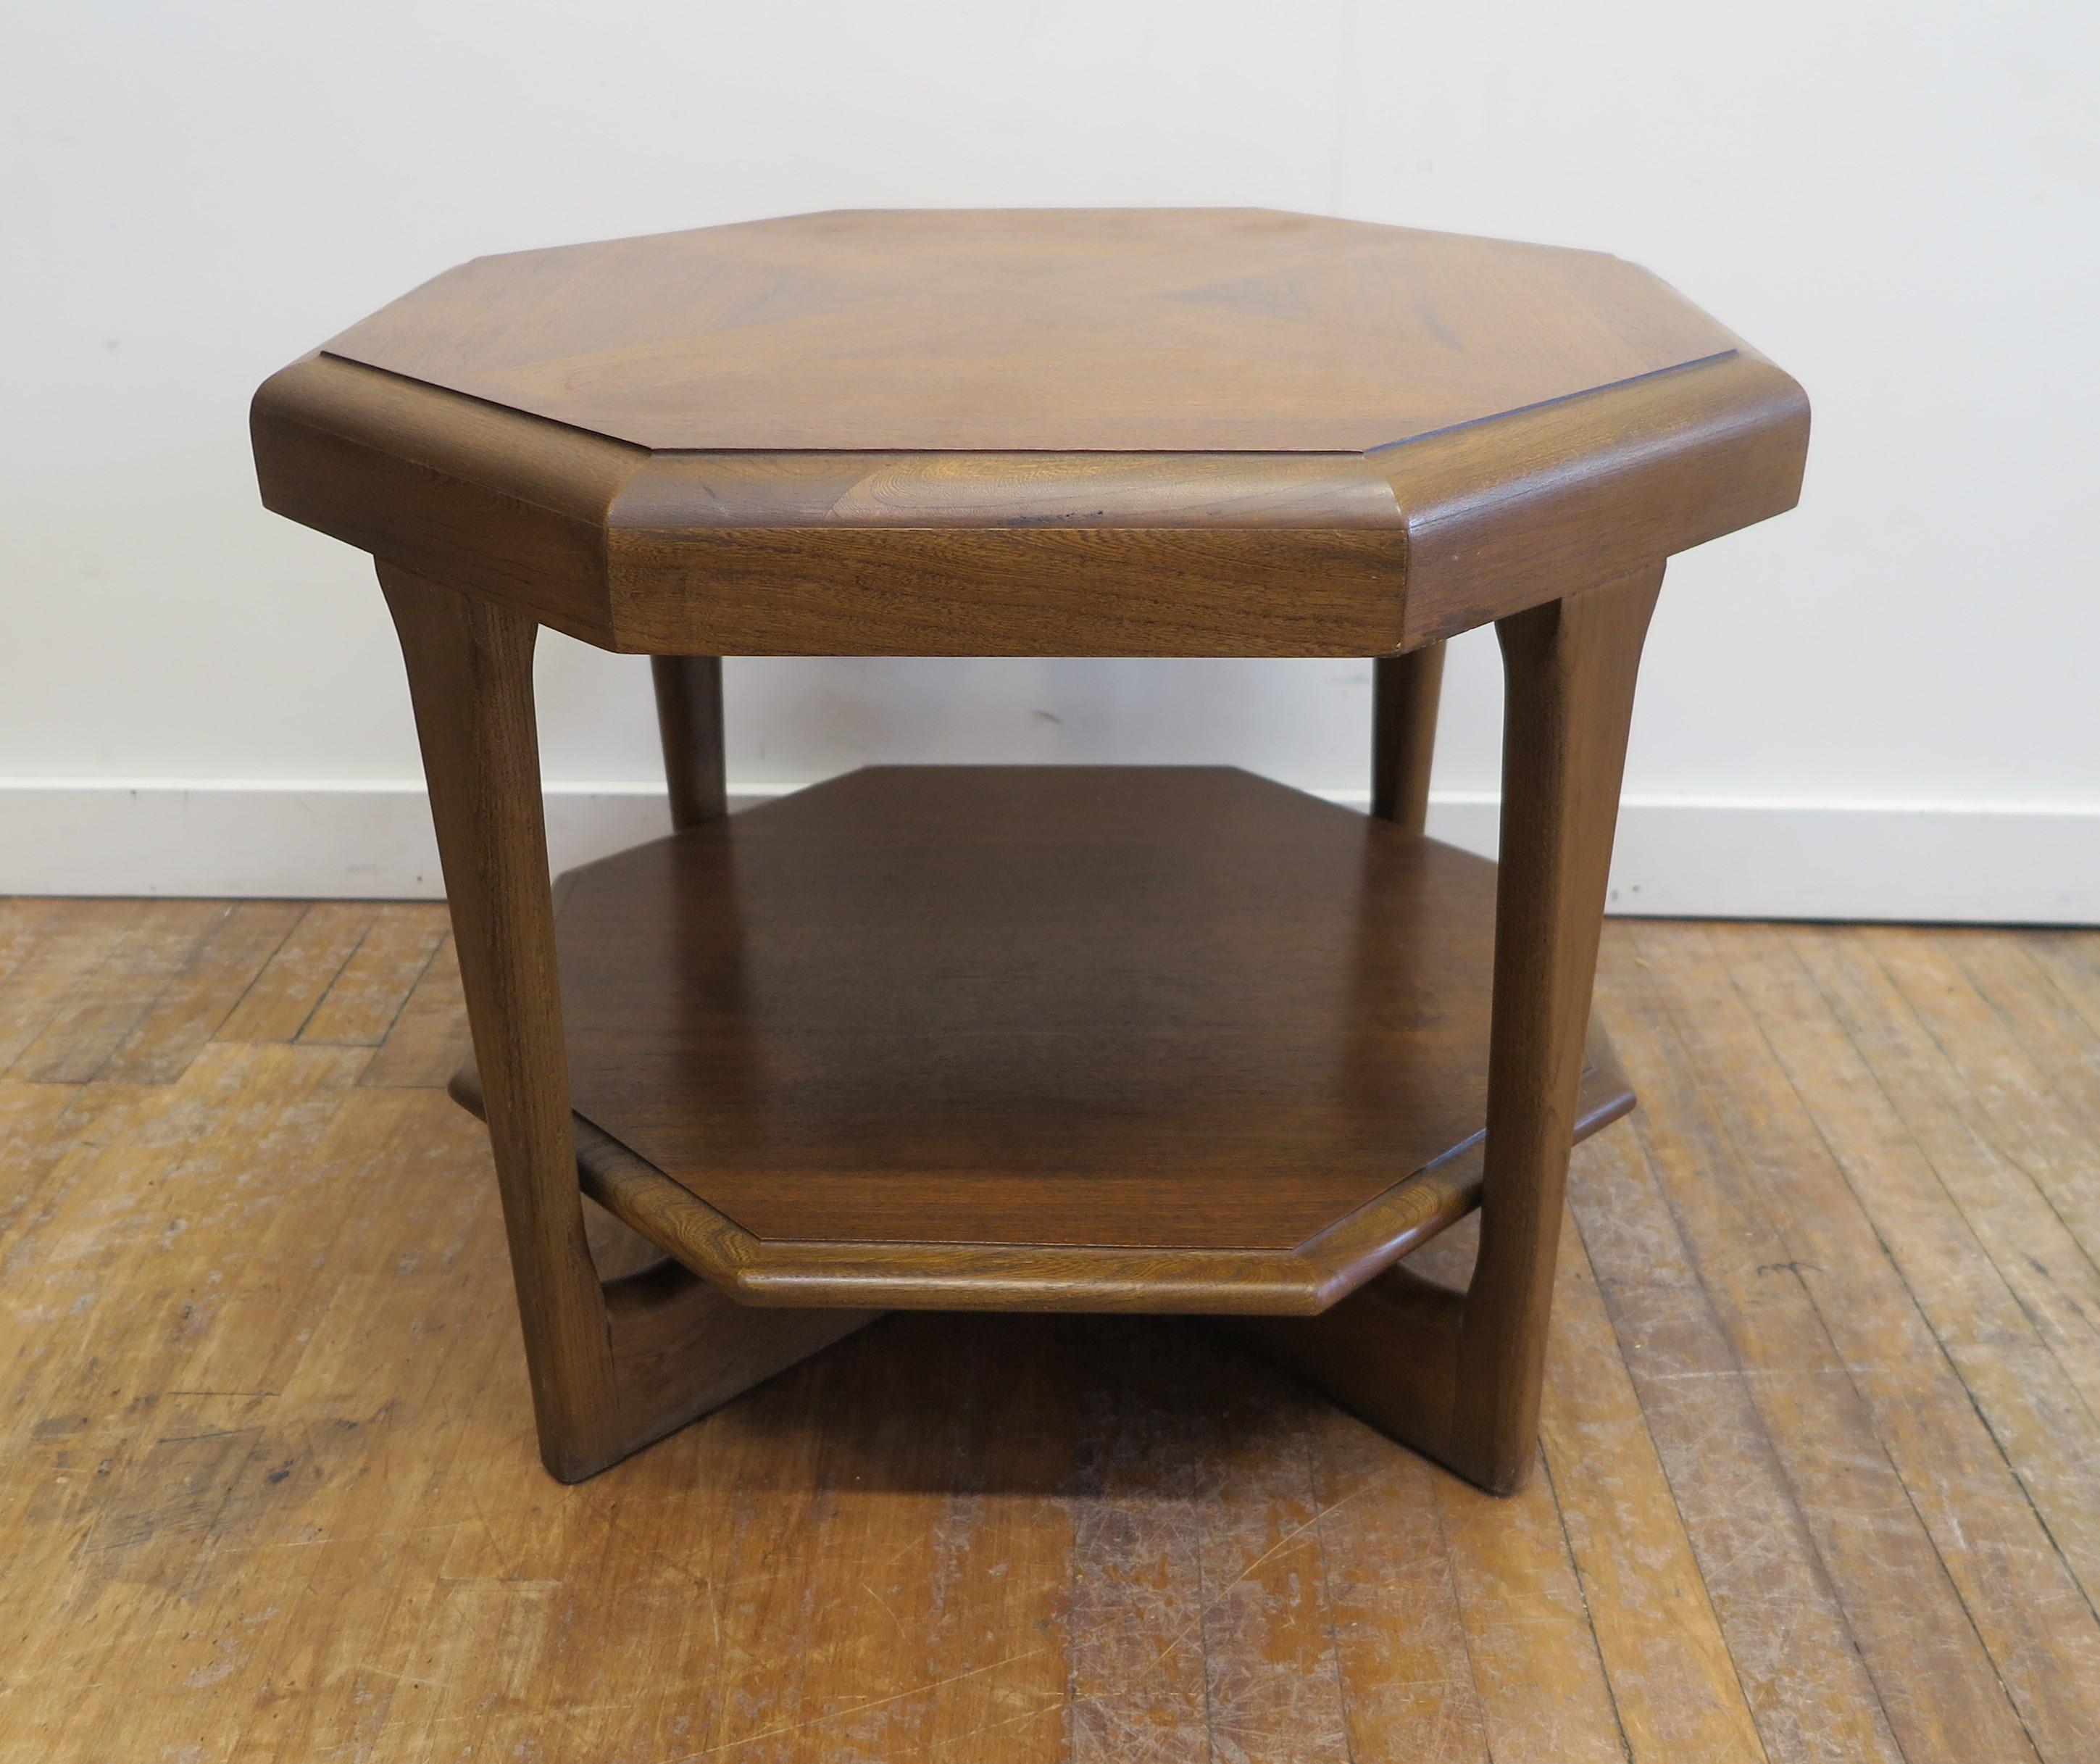 Mid-Century Modern hexagon cocktail and or end side table. Mid century walnut side table two tiered by Lane attributed design Adrian Pearsall. Walnut parquetry with x design matches the legs x base support. In good condition light sings of ware.